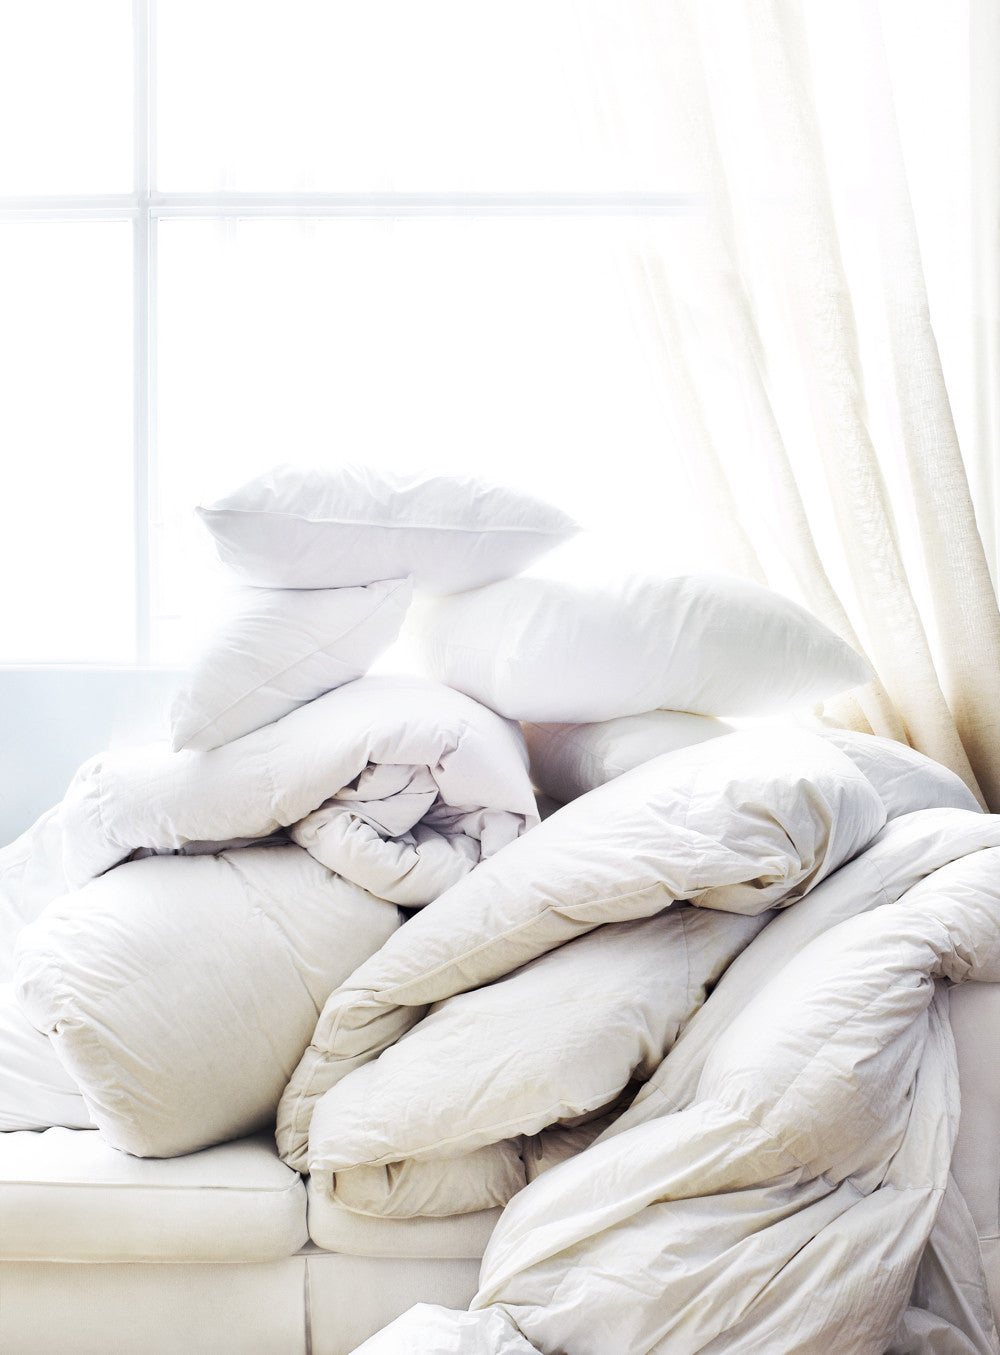 Q&A: Help! I want a puffy duvet - will I be too hot?